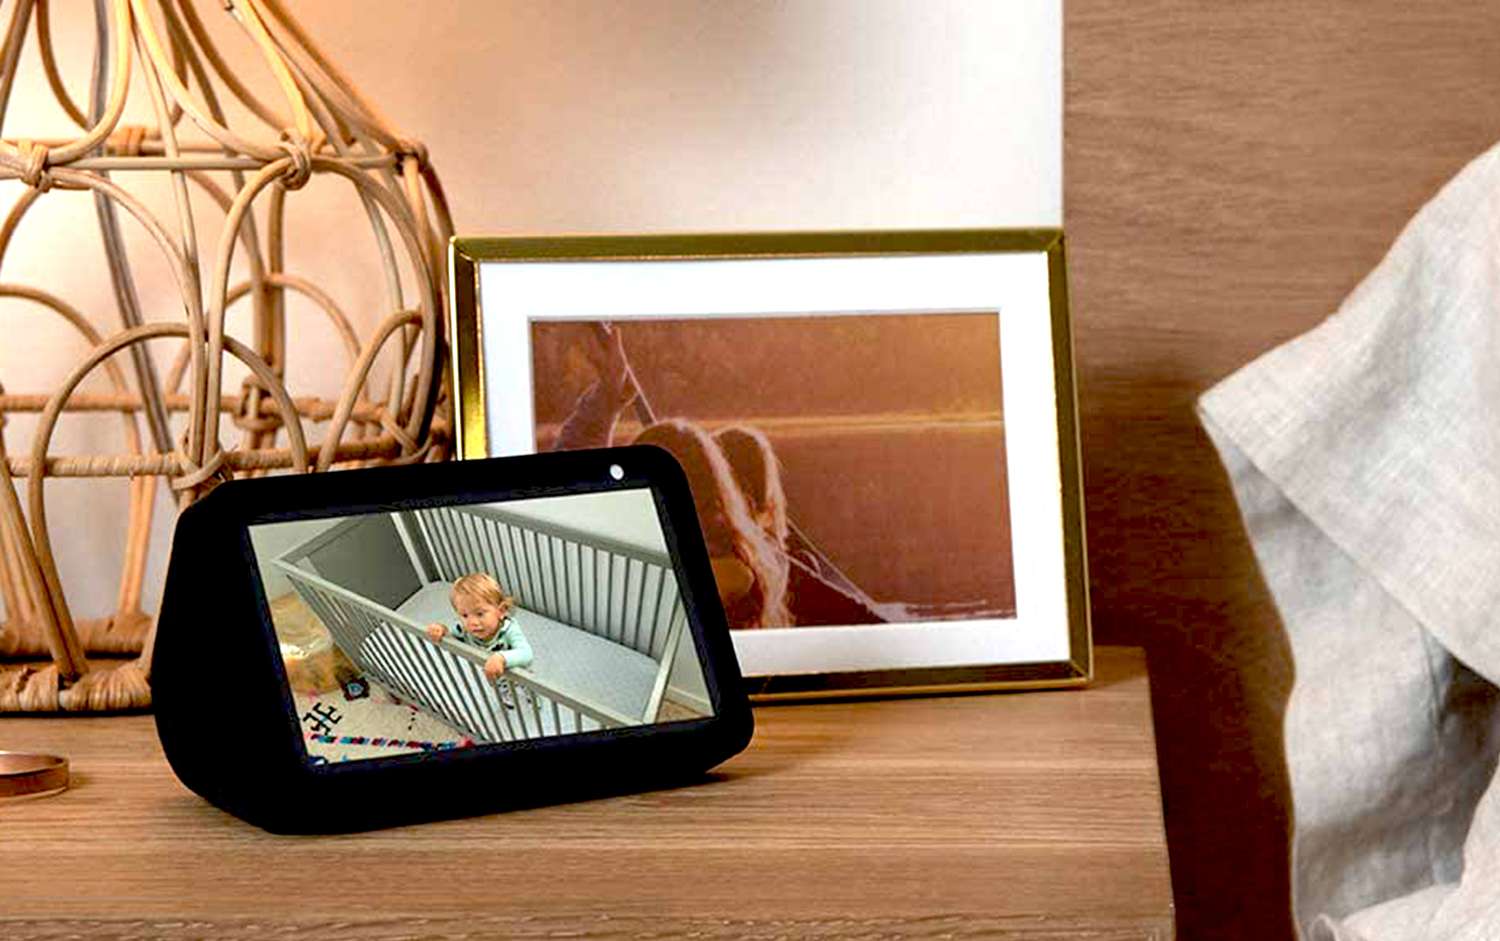 An Echo Show 5 on a bedside table in a bedroom